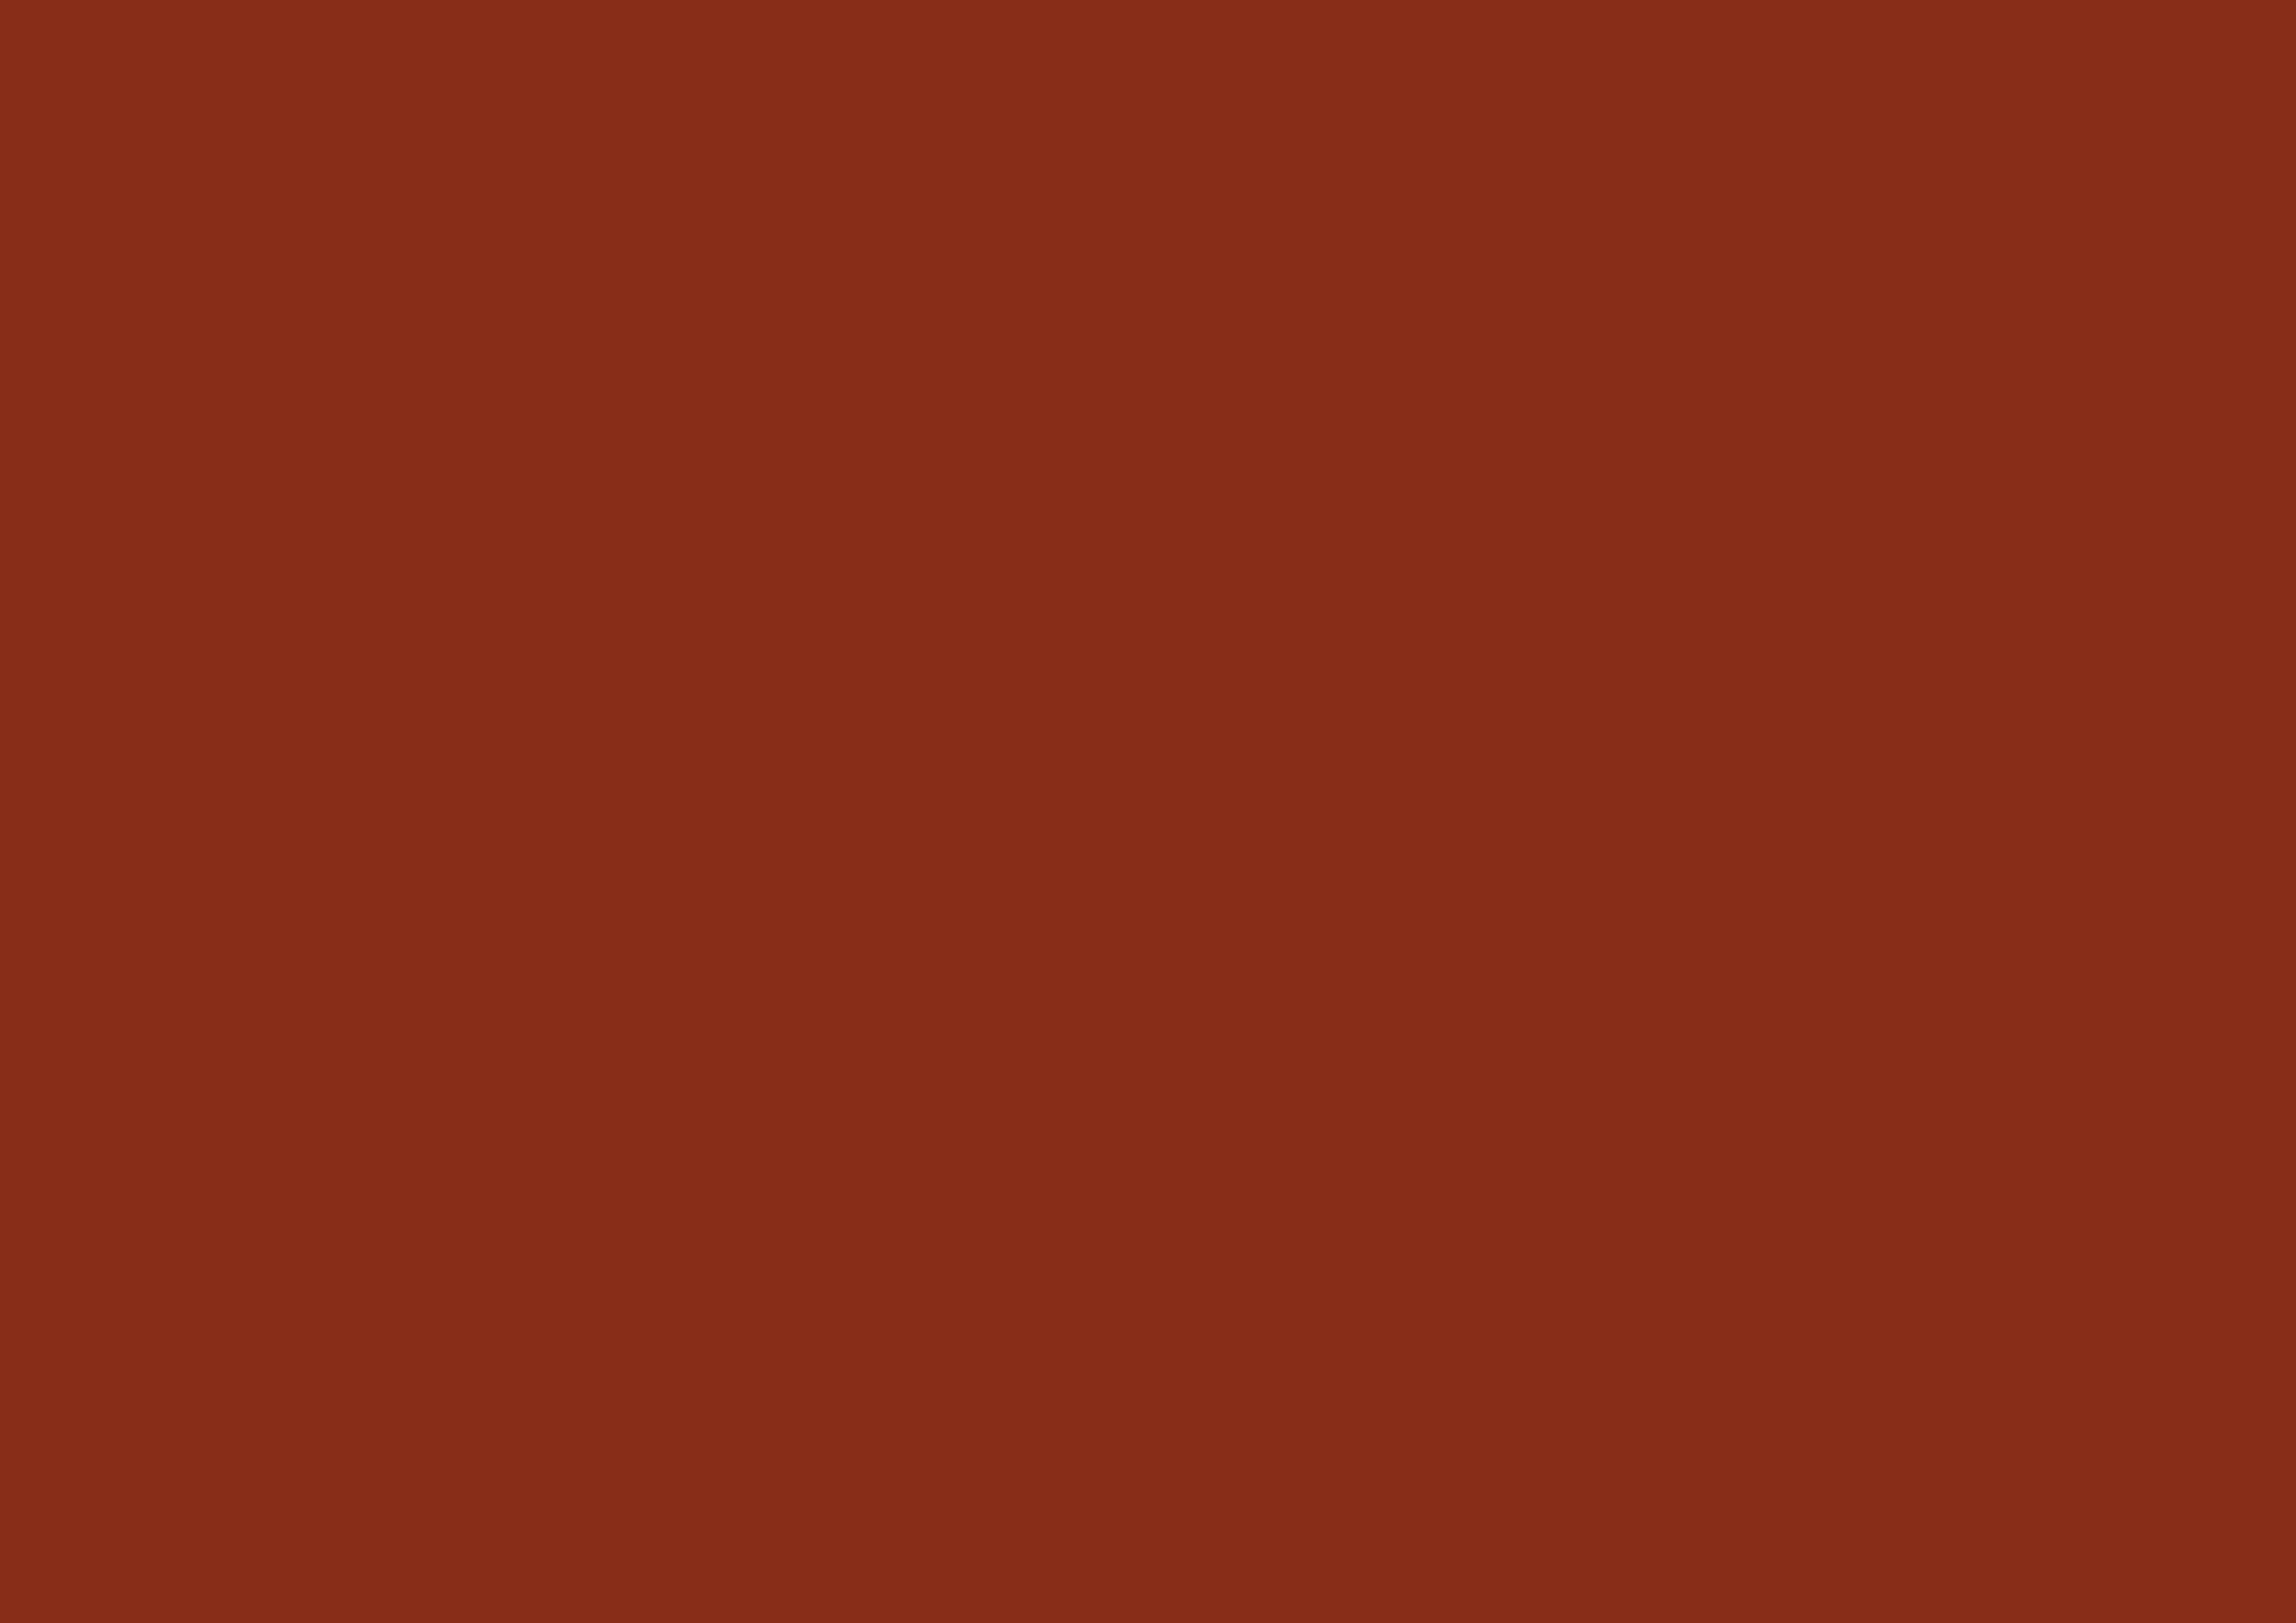 3508x2480 Sienna Solid Color Background